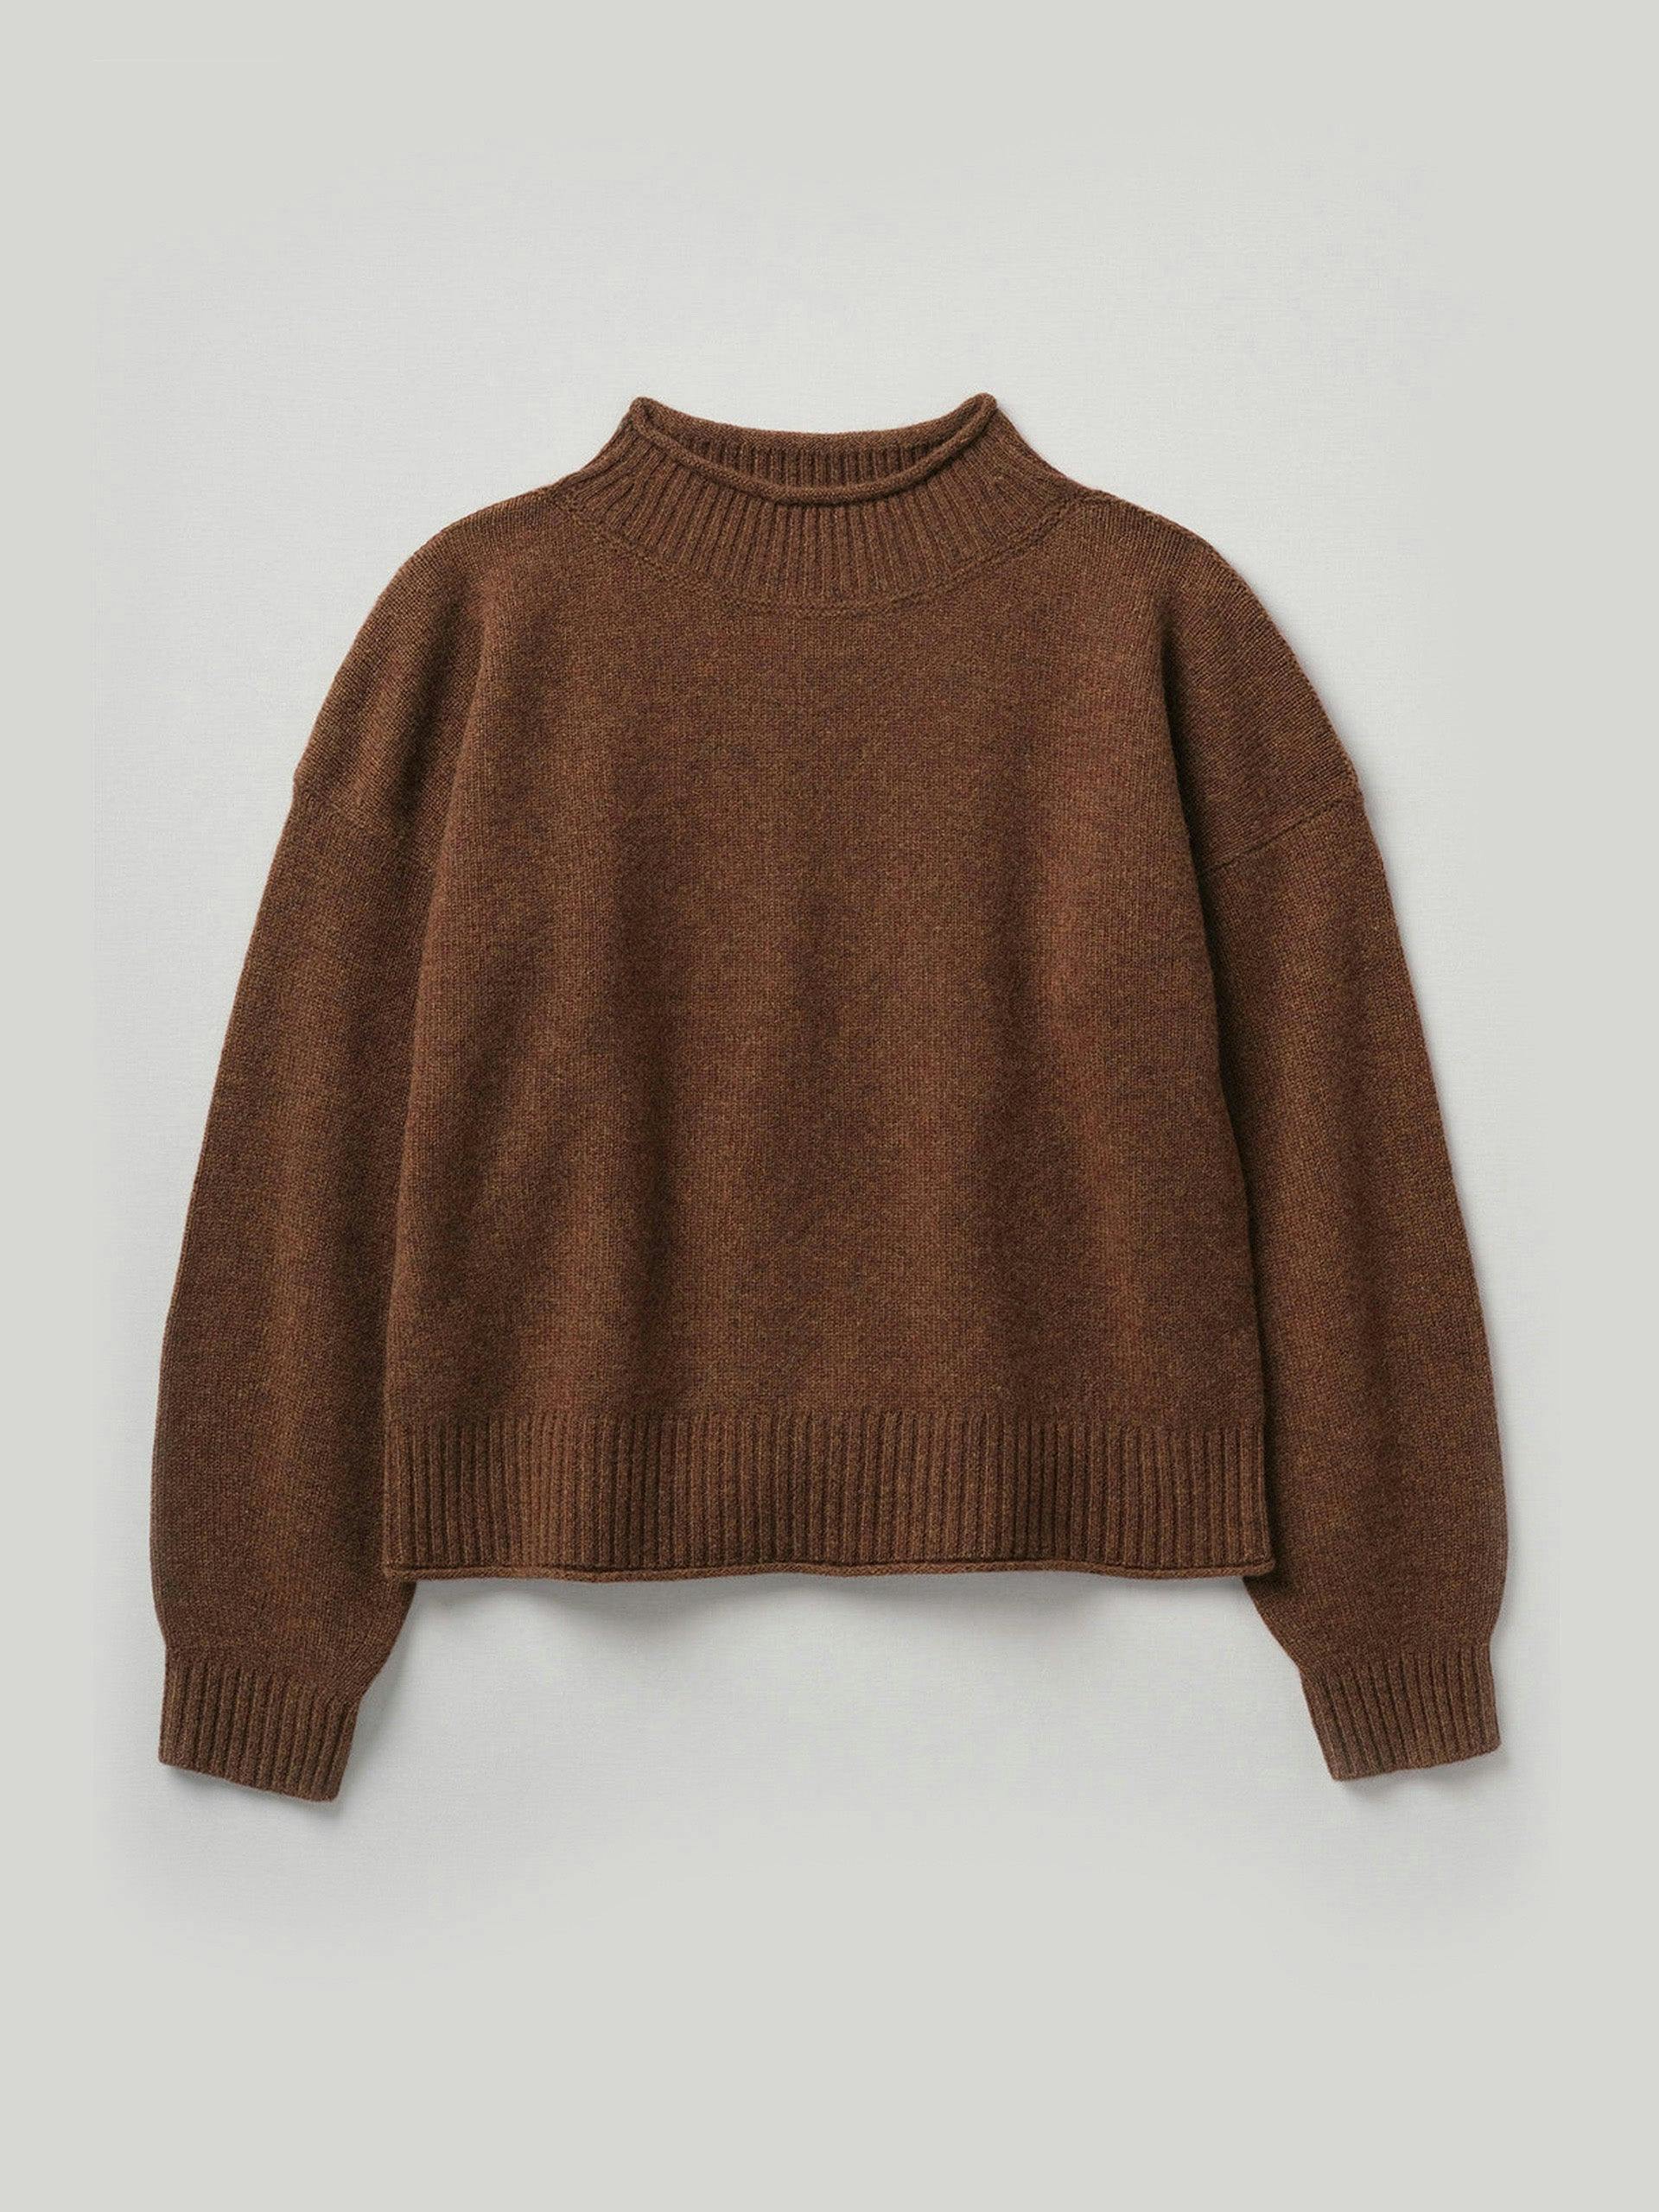 Brown high-neck knitted cashmere jumper